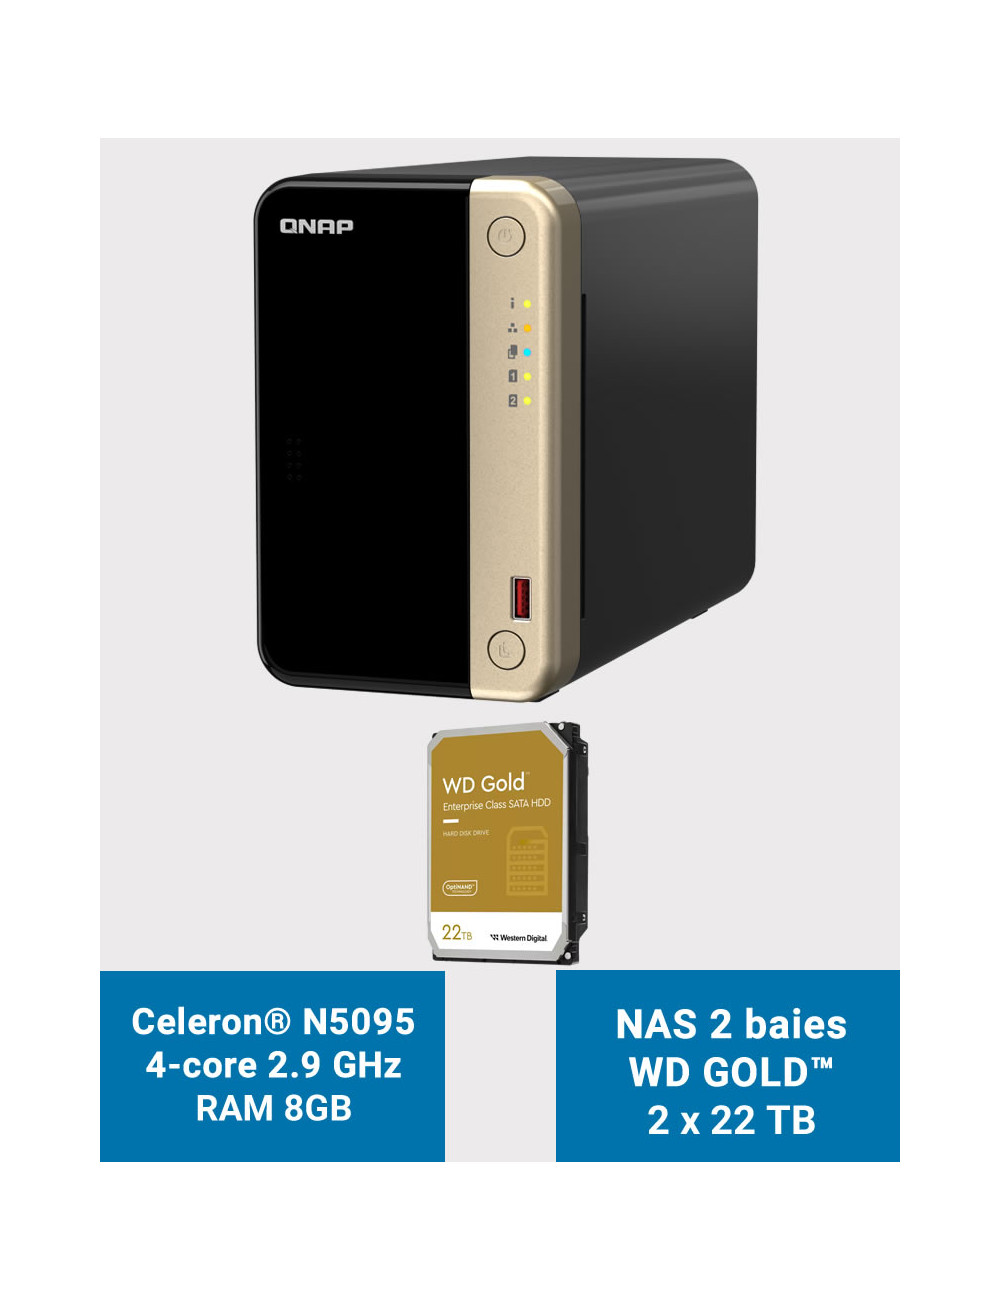 QNAP TS-264 8GB Serveur NAS 2 baies WD GOLD 44To (2x22To)